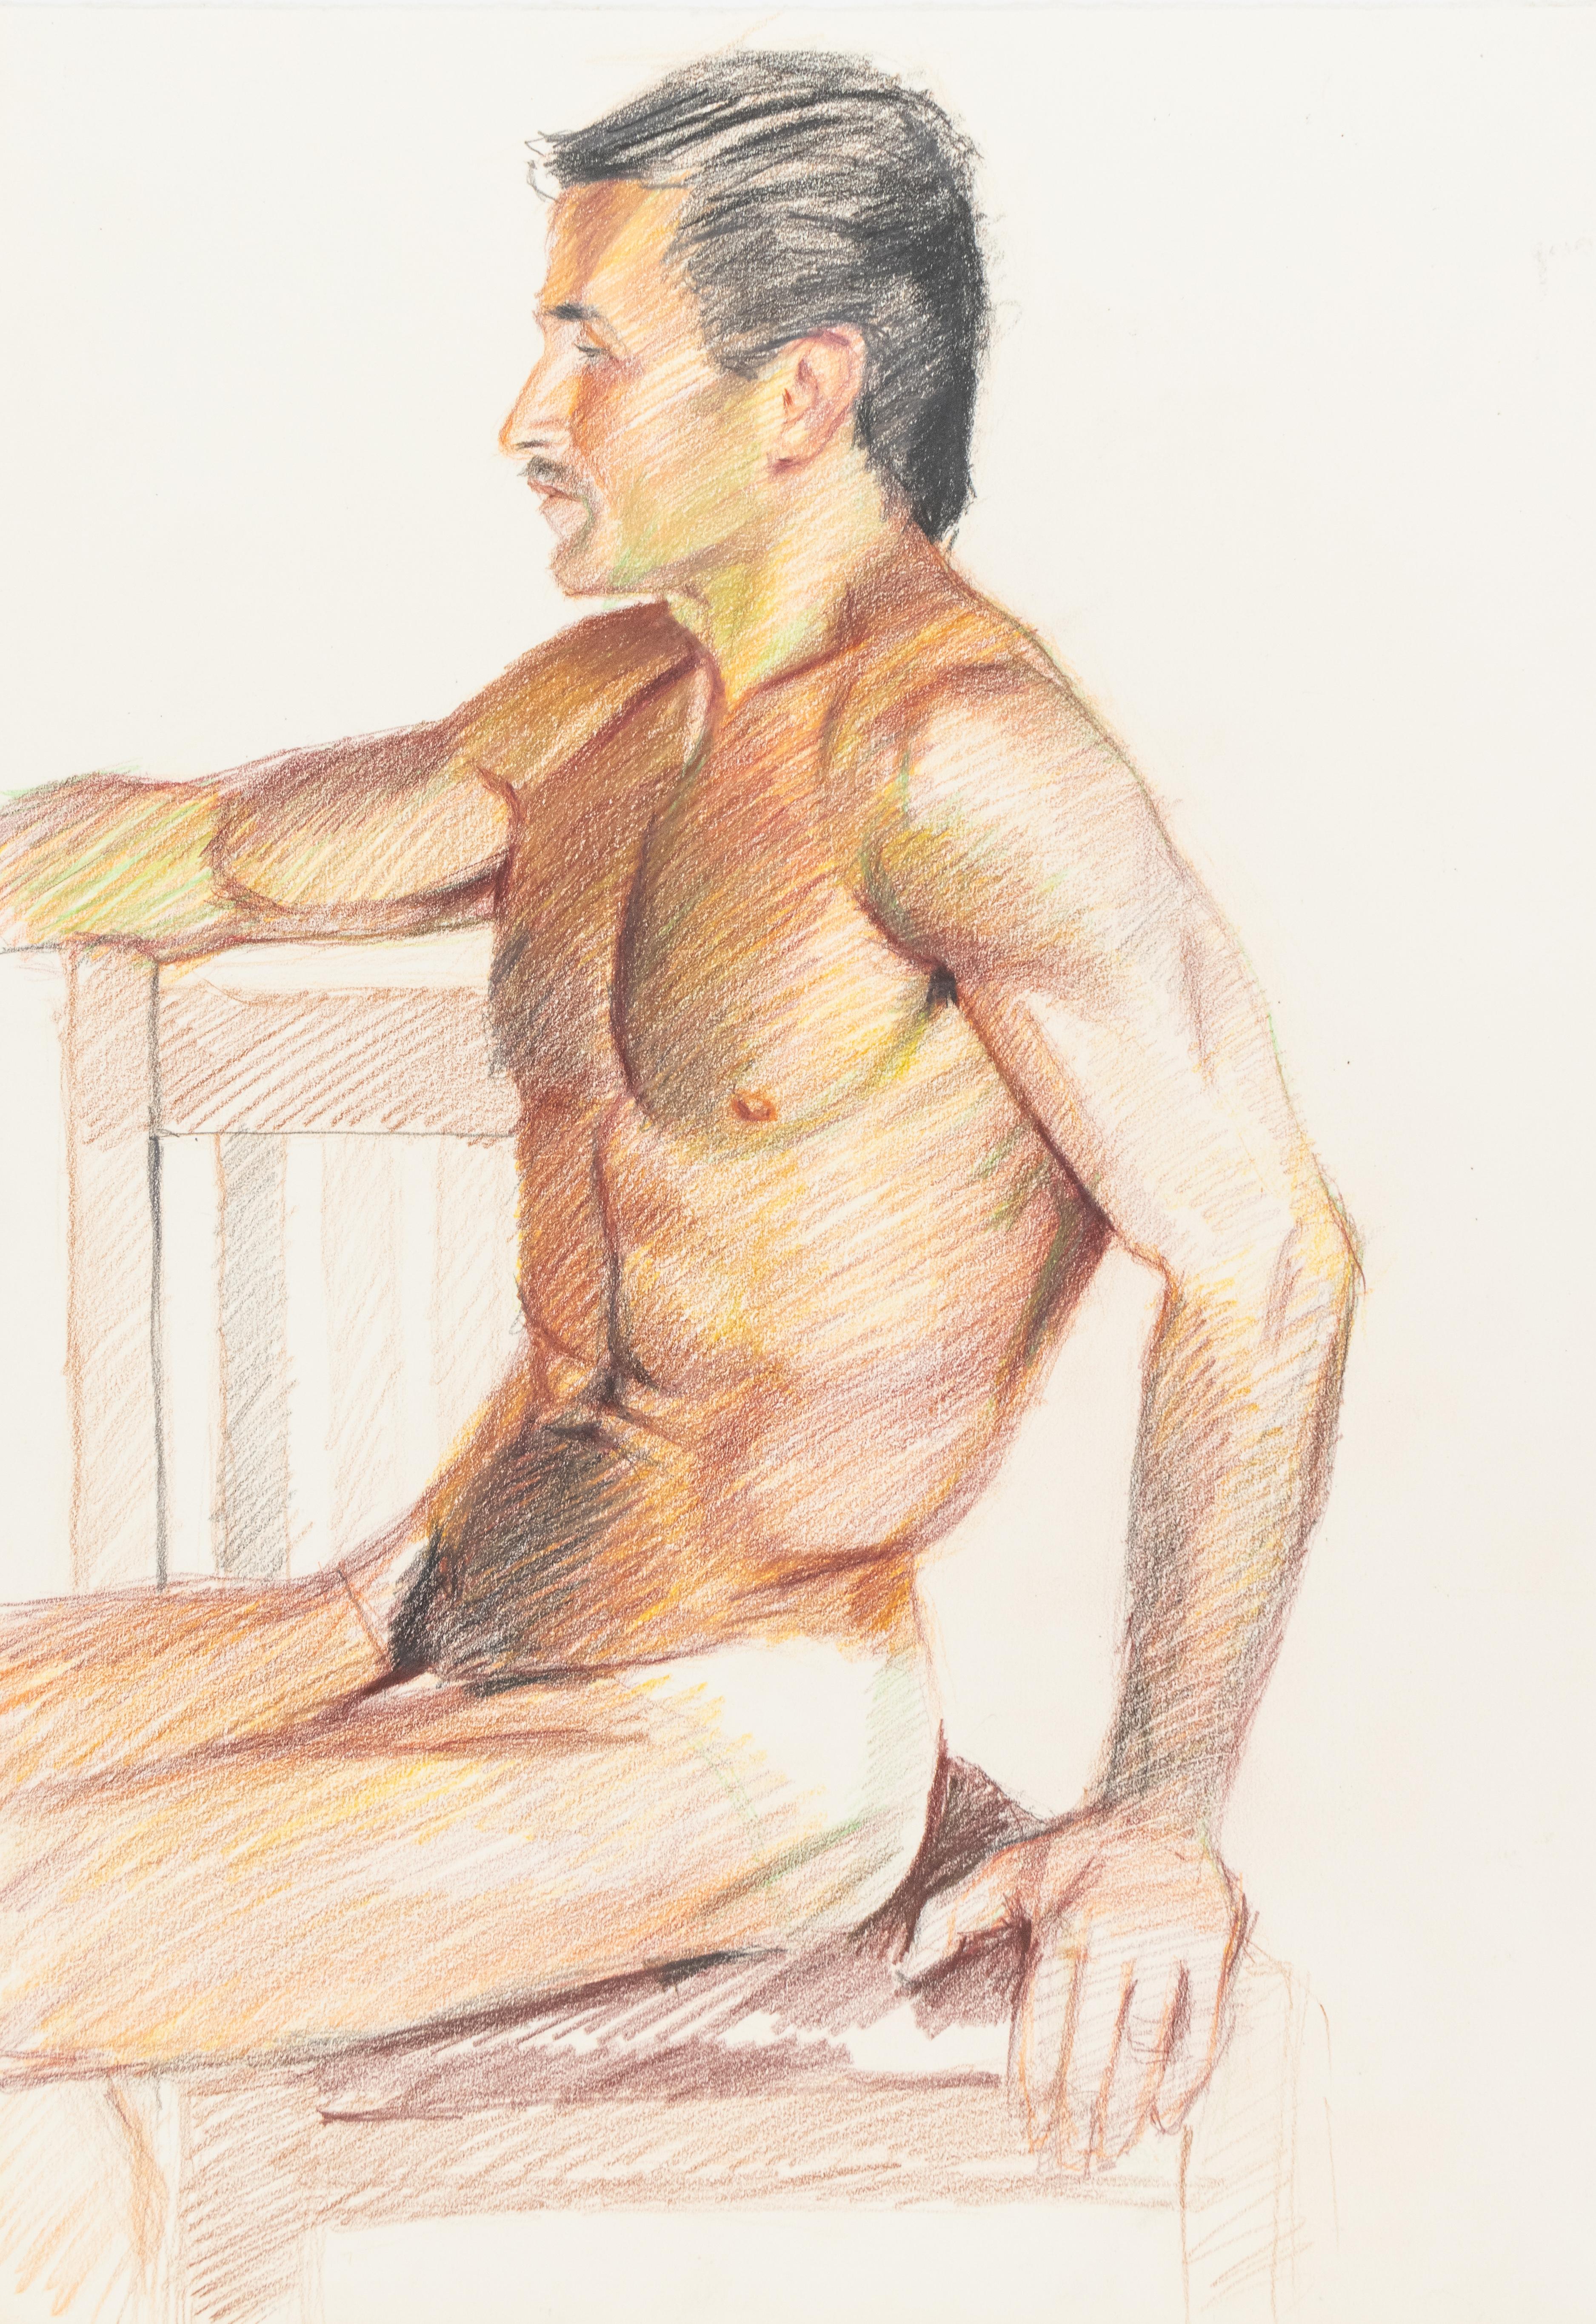 Untitled (Seated Nude Male Facing Left) - Art by Mark Beard